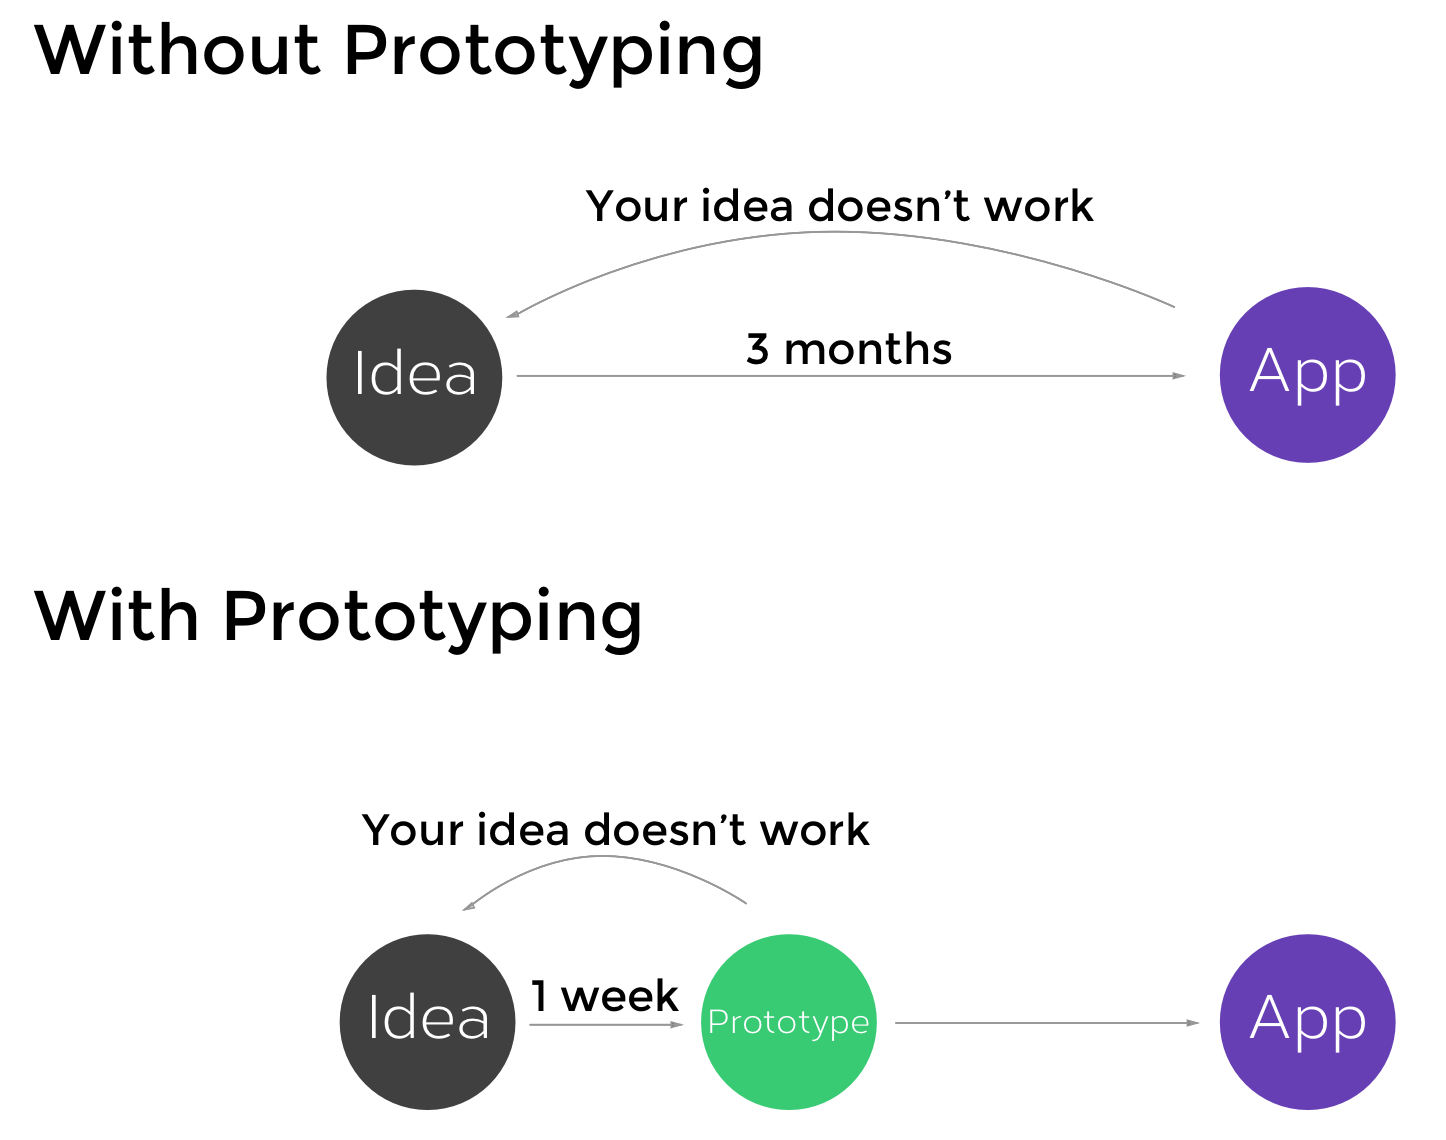 Figure 7-1. Prototyping saves you money and time